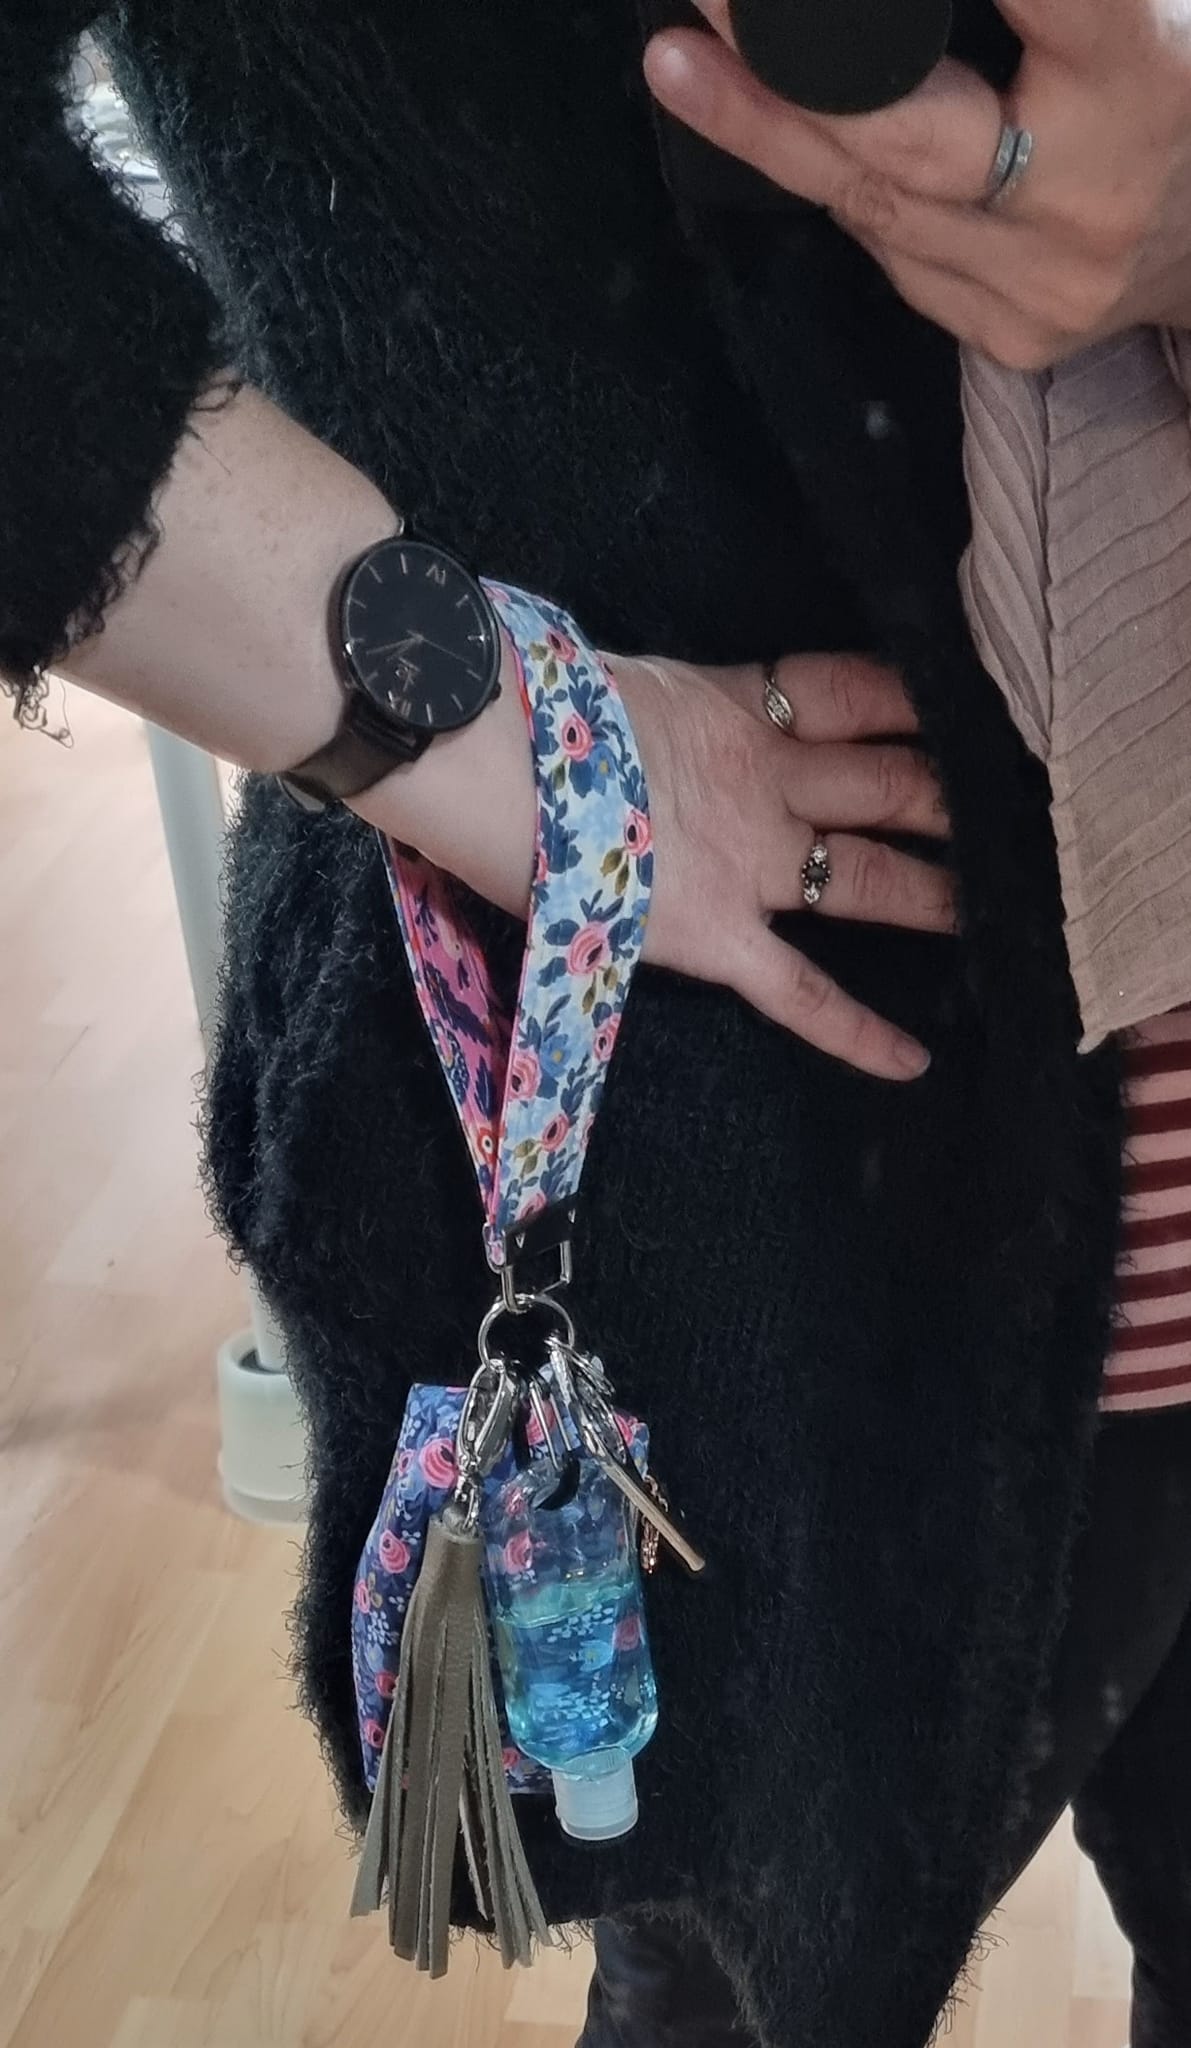 The Quick Zip Trio from Sewing Patterns by Mrs H, worn by the wristlet